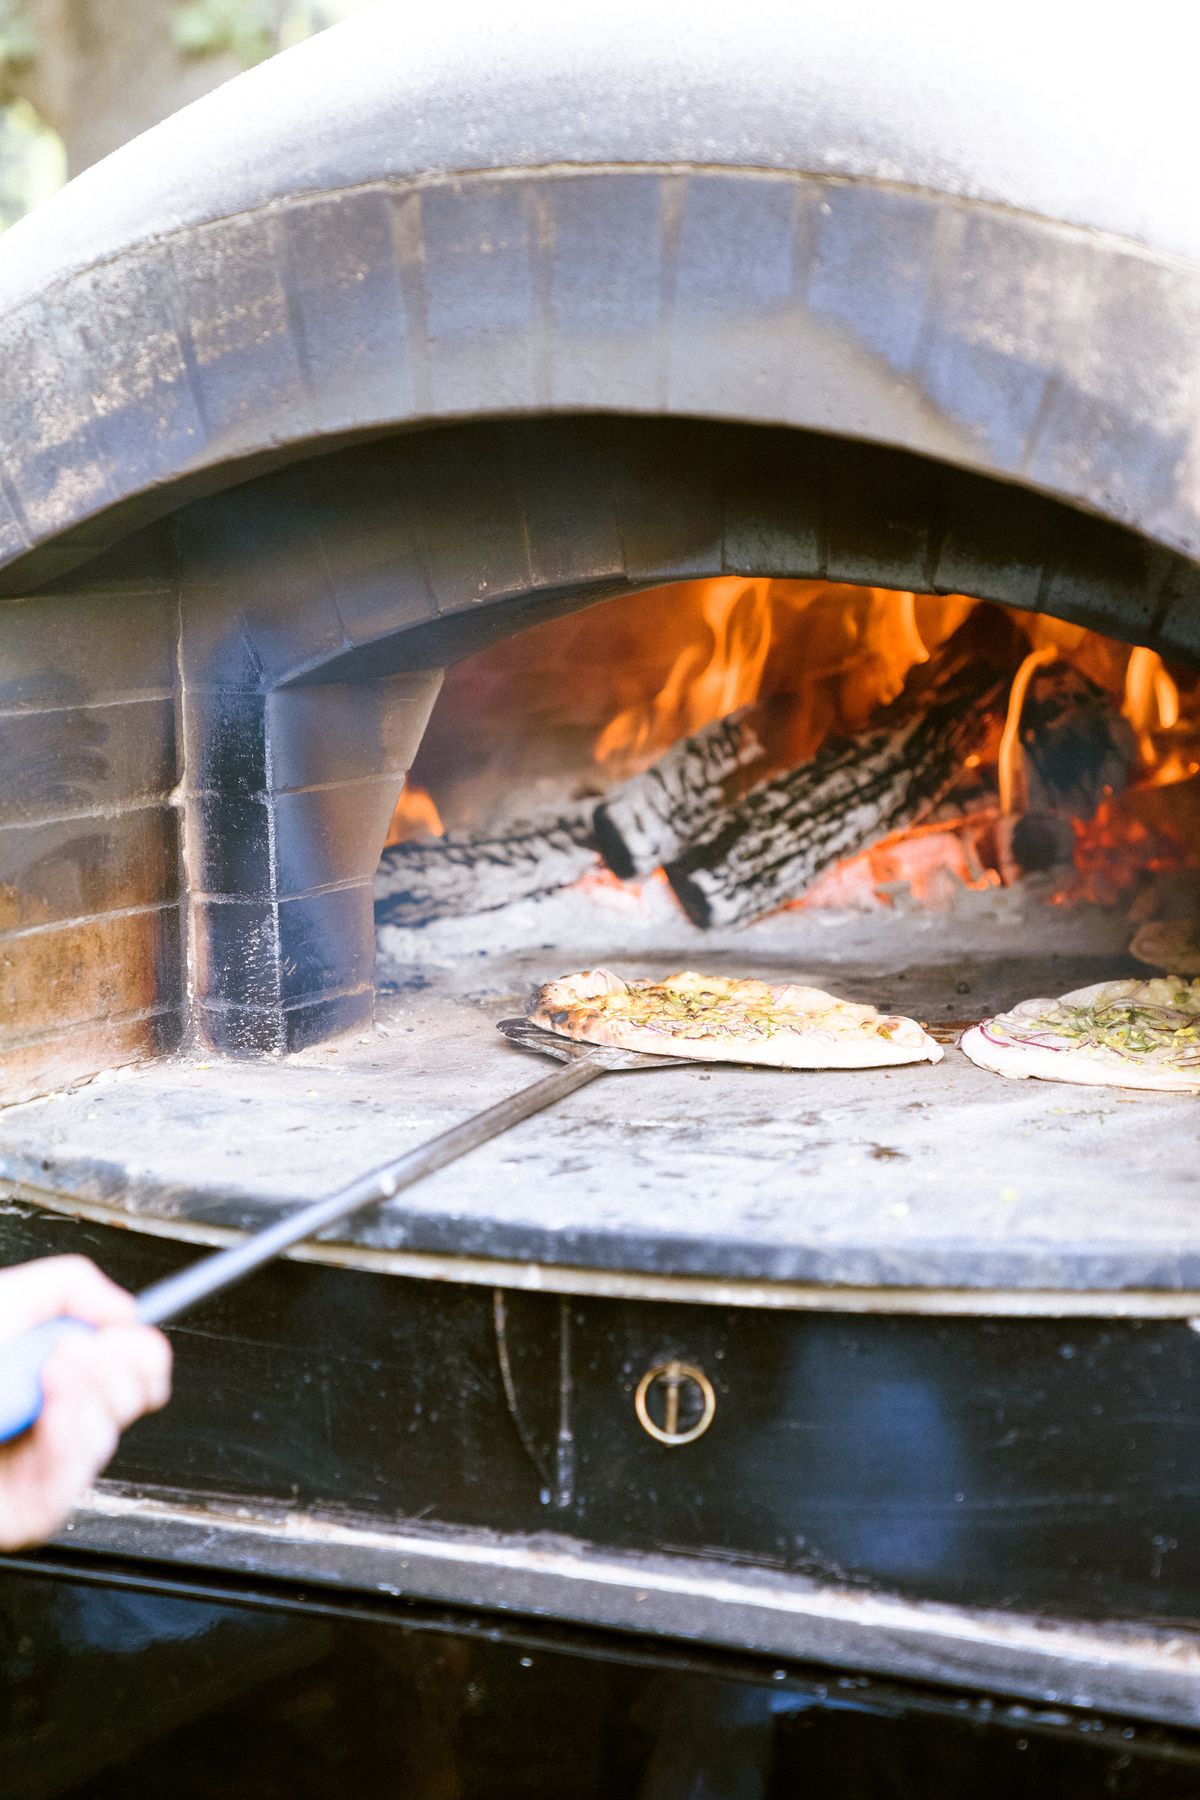 A pizza being put into an outdoor oven.